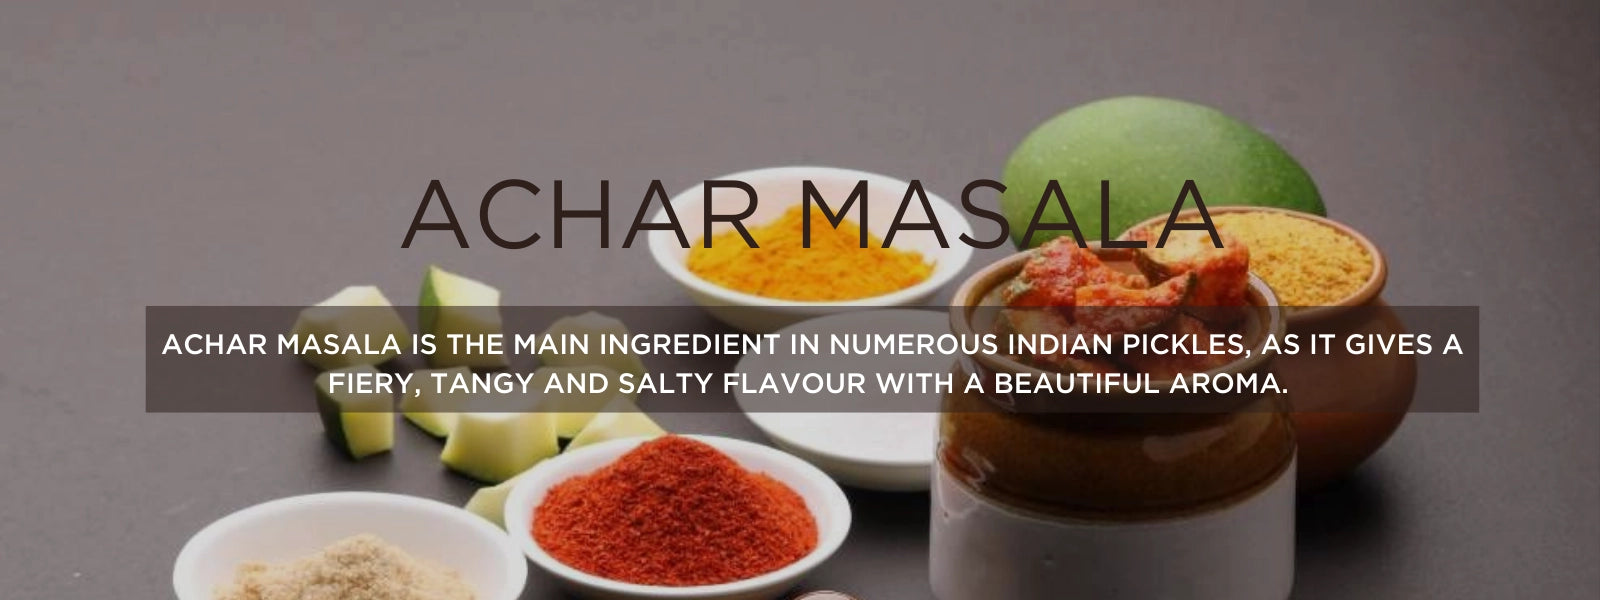 Achar Masala - Health Benefits, Uses and Important Facts